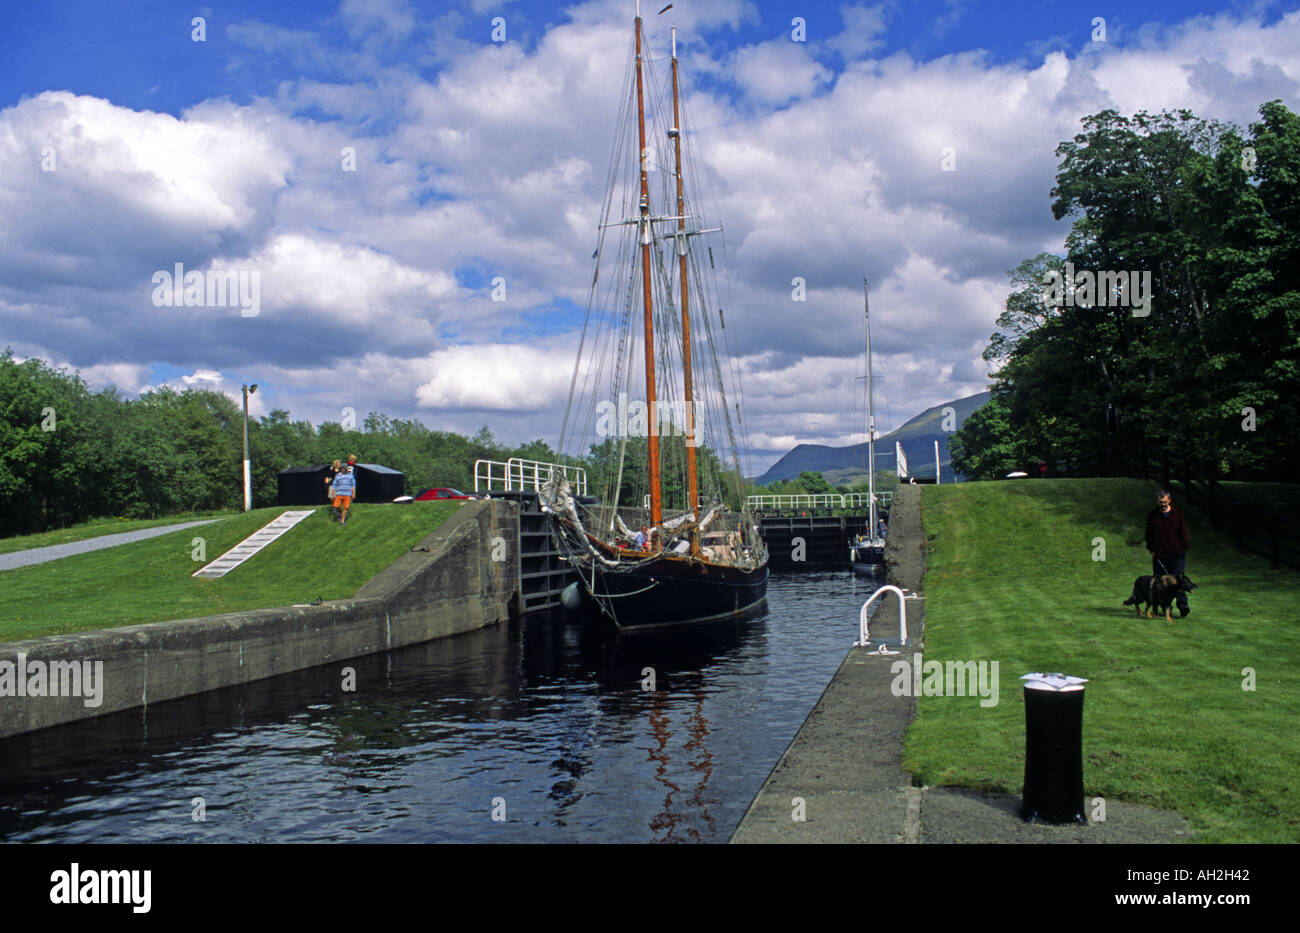 A scooner from Aaland Islands passing through Corpach basin in the Caledonian Canal Scotland Stock Photo